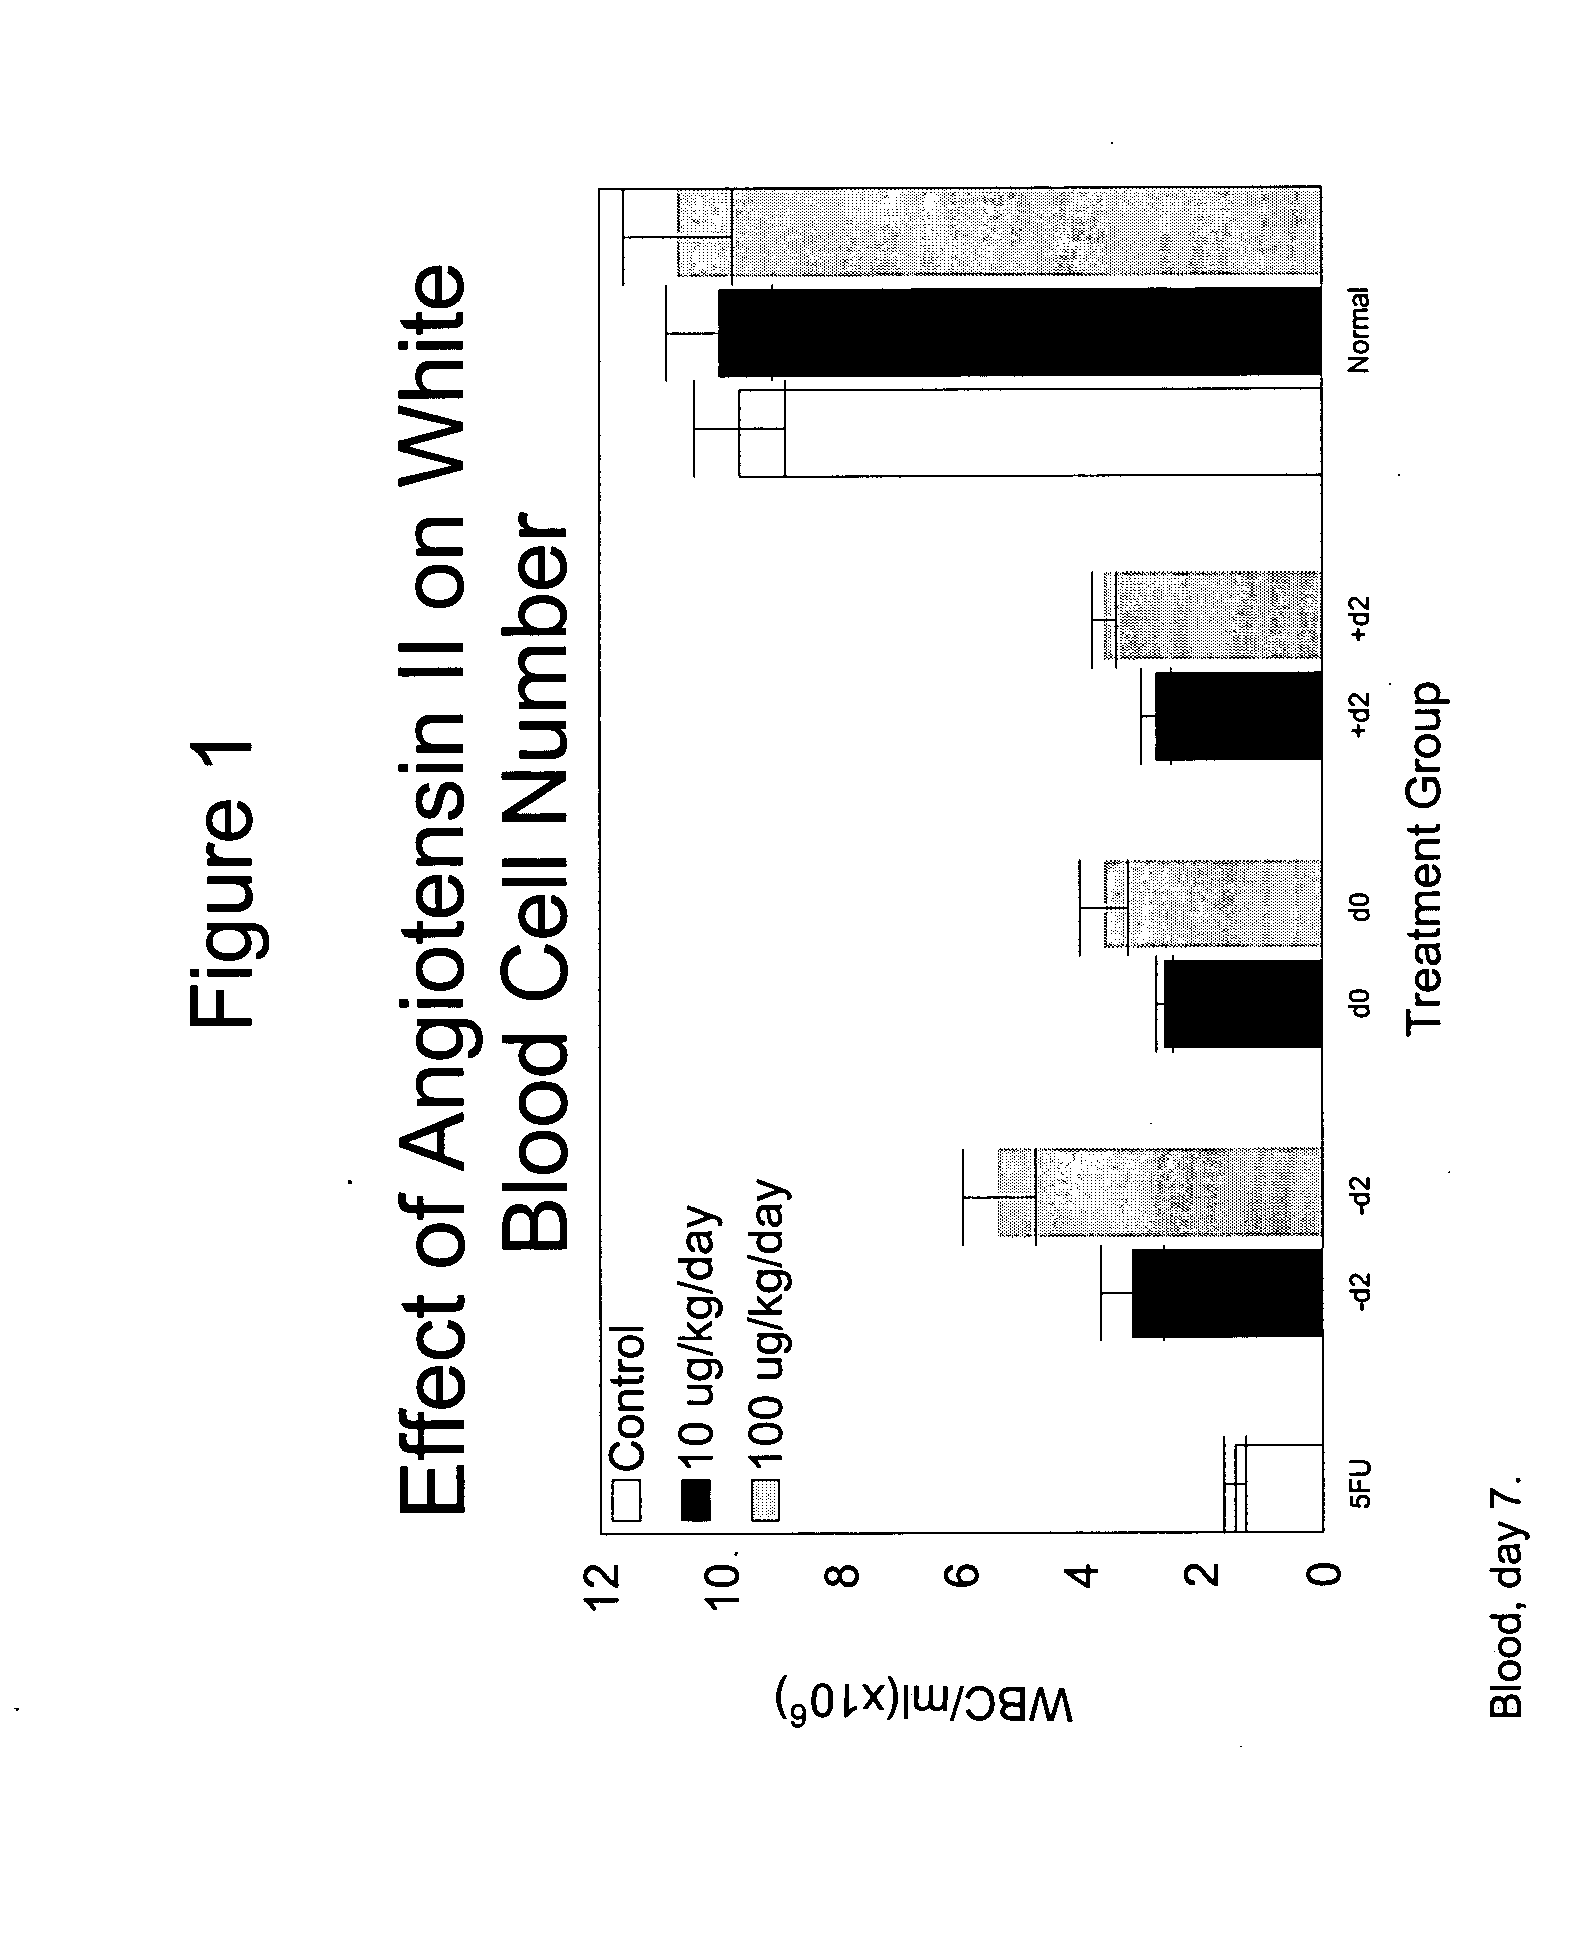 Method for treating a patient undergoing chemotherapy